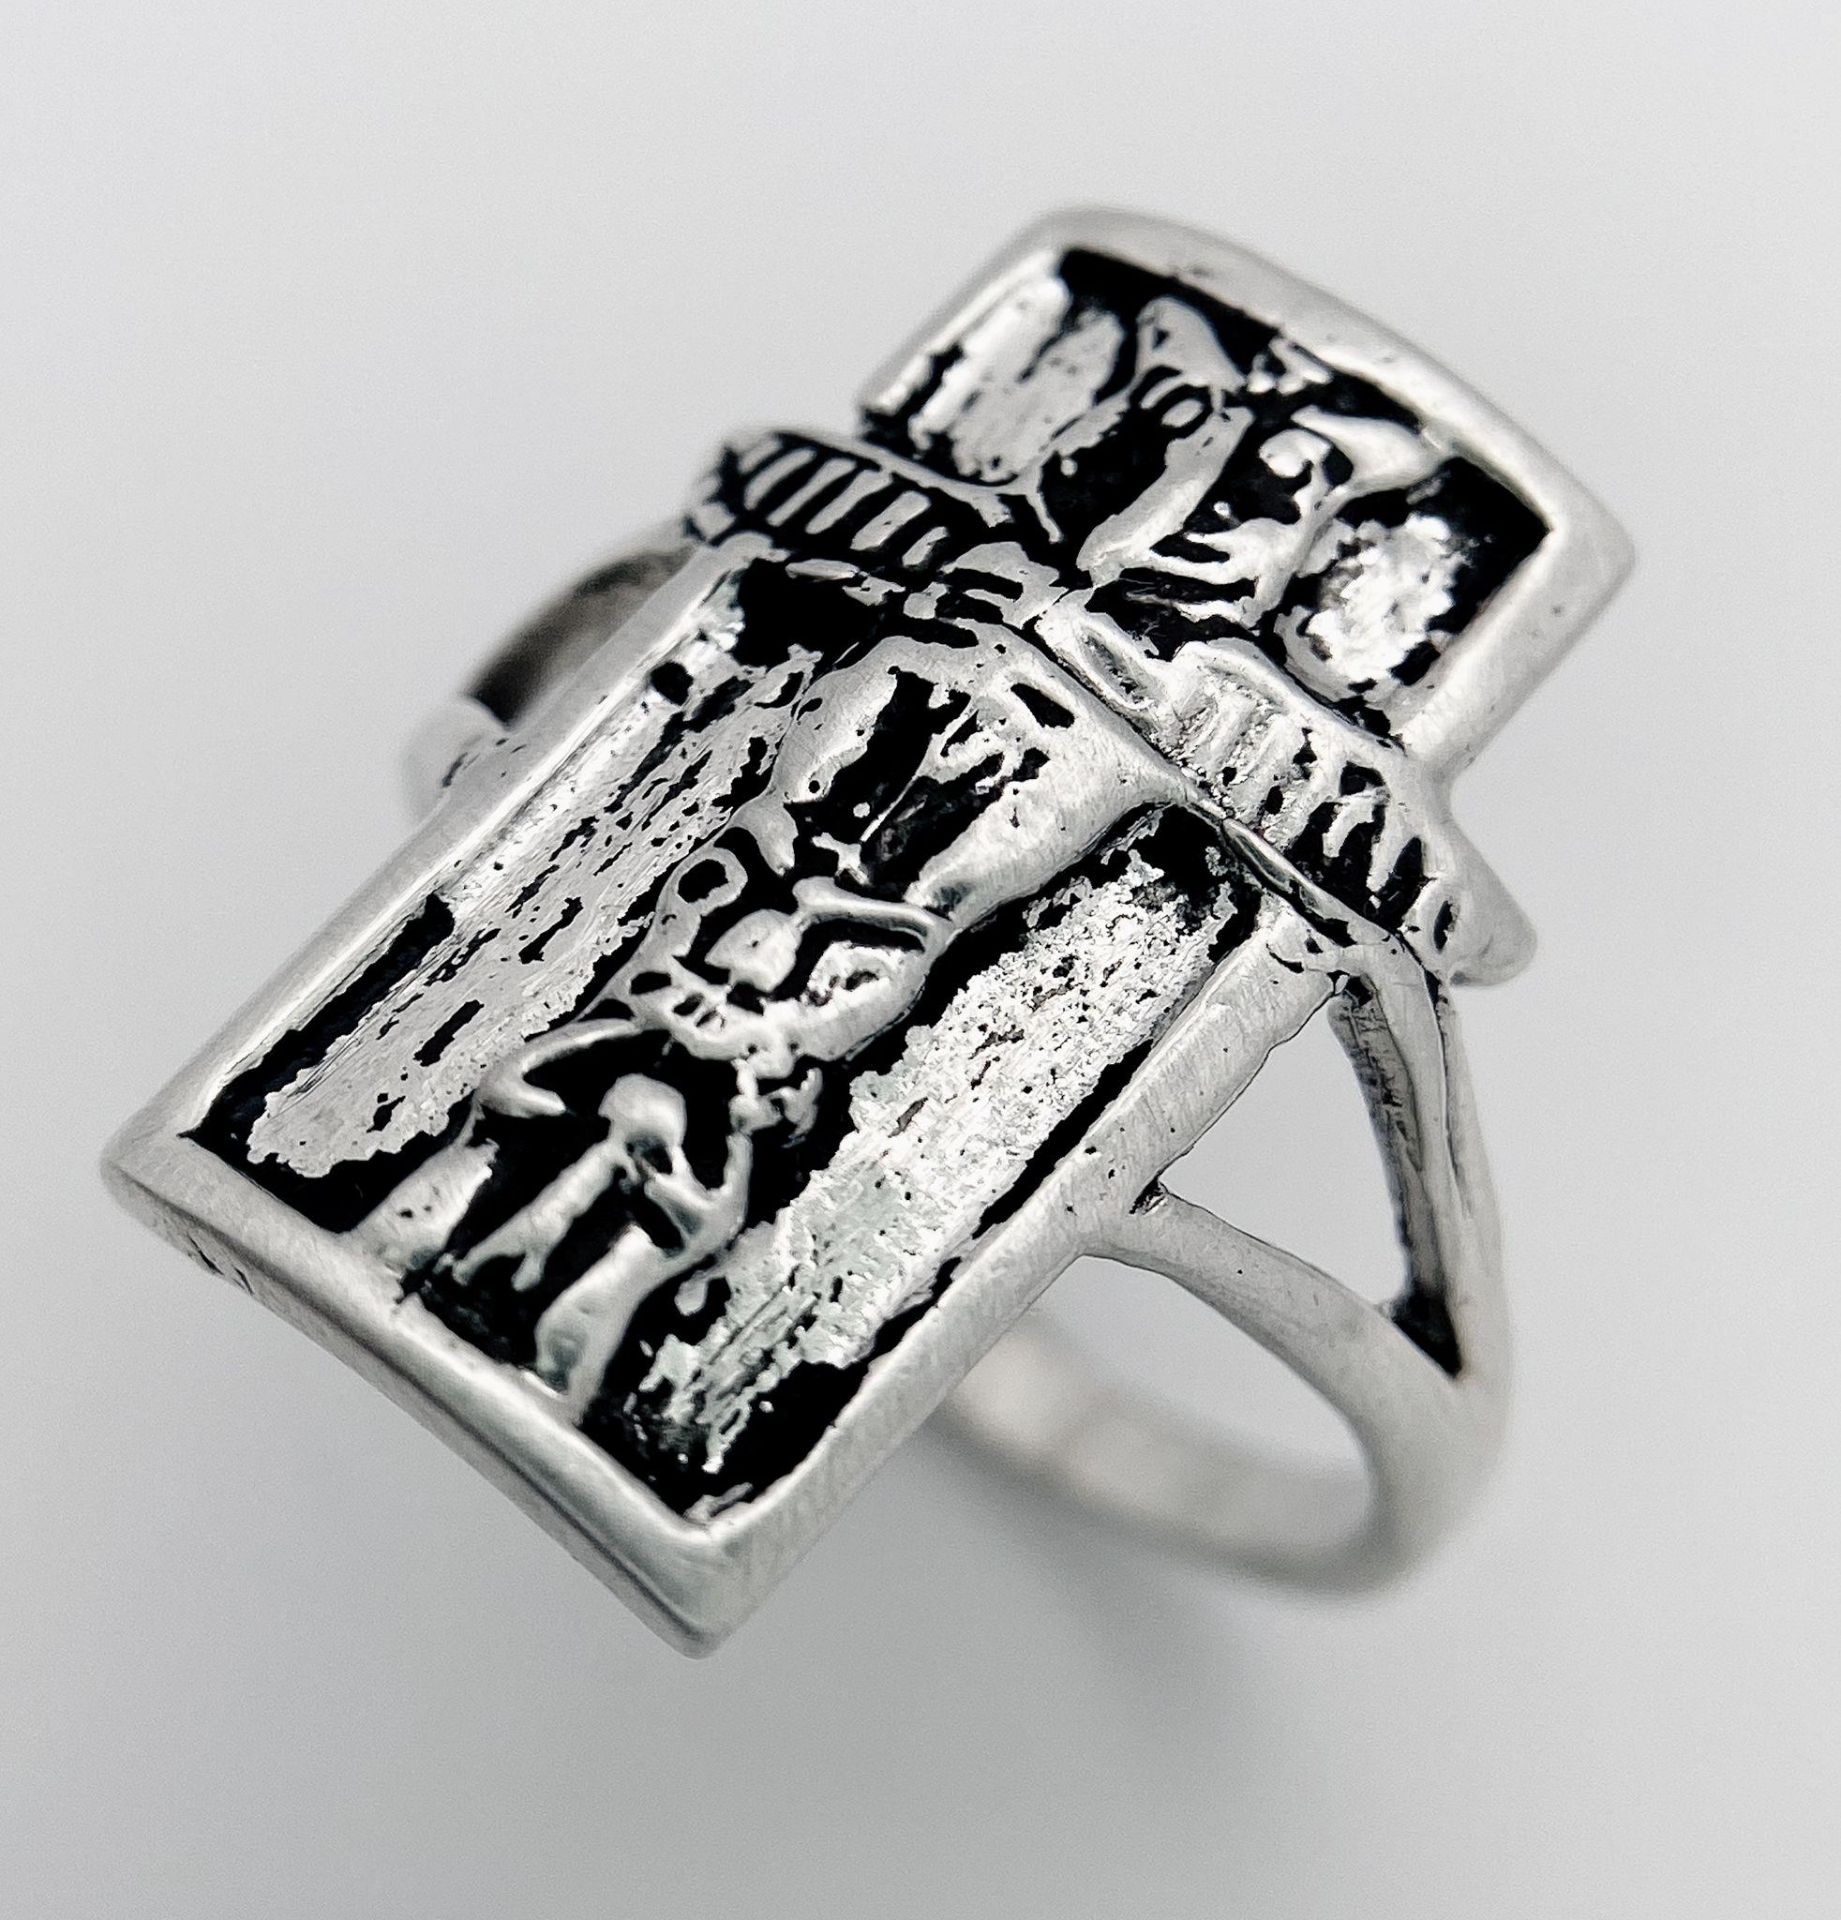 A Vintage Silver Totem Pole Detailed Native American/ Ethnic Totem Pole Ring Size N. The Crown - Image 5 of 9